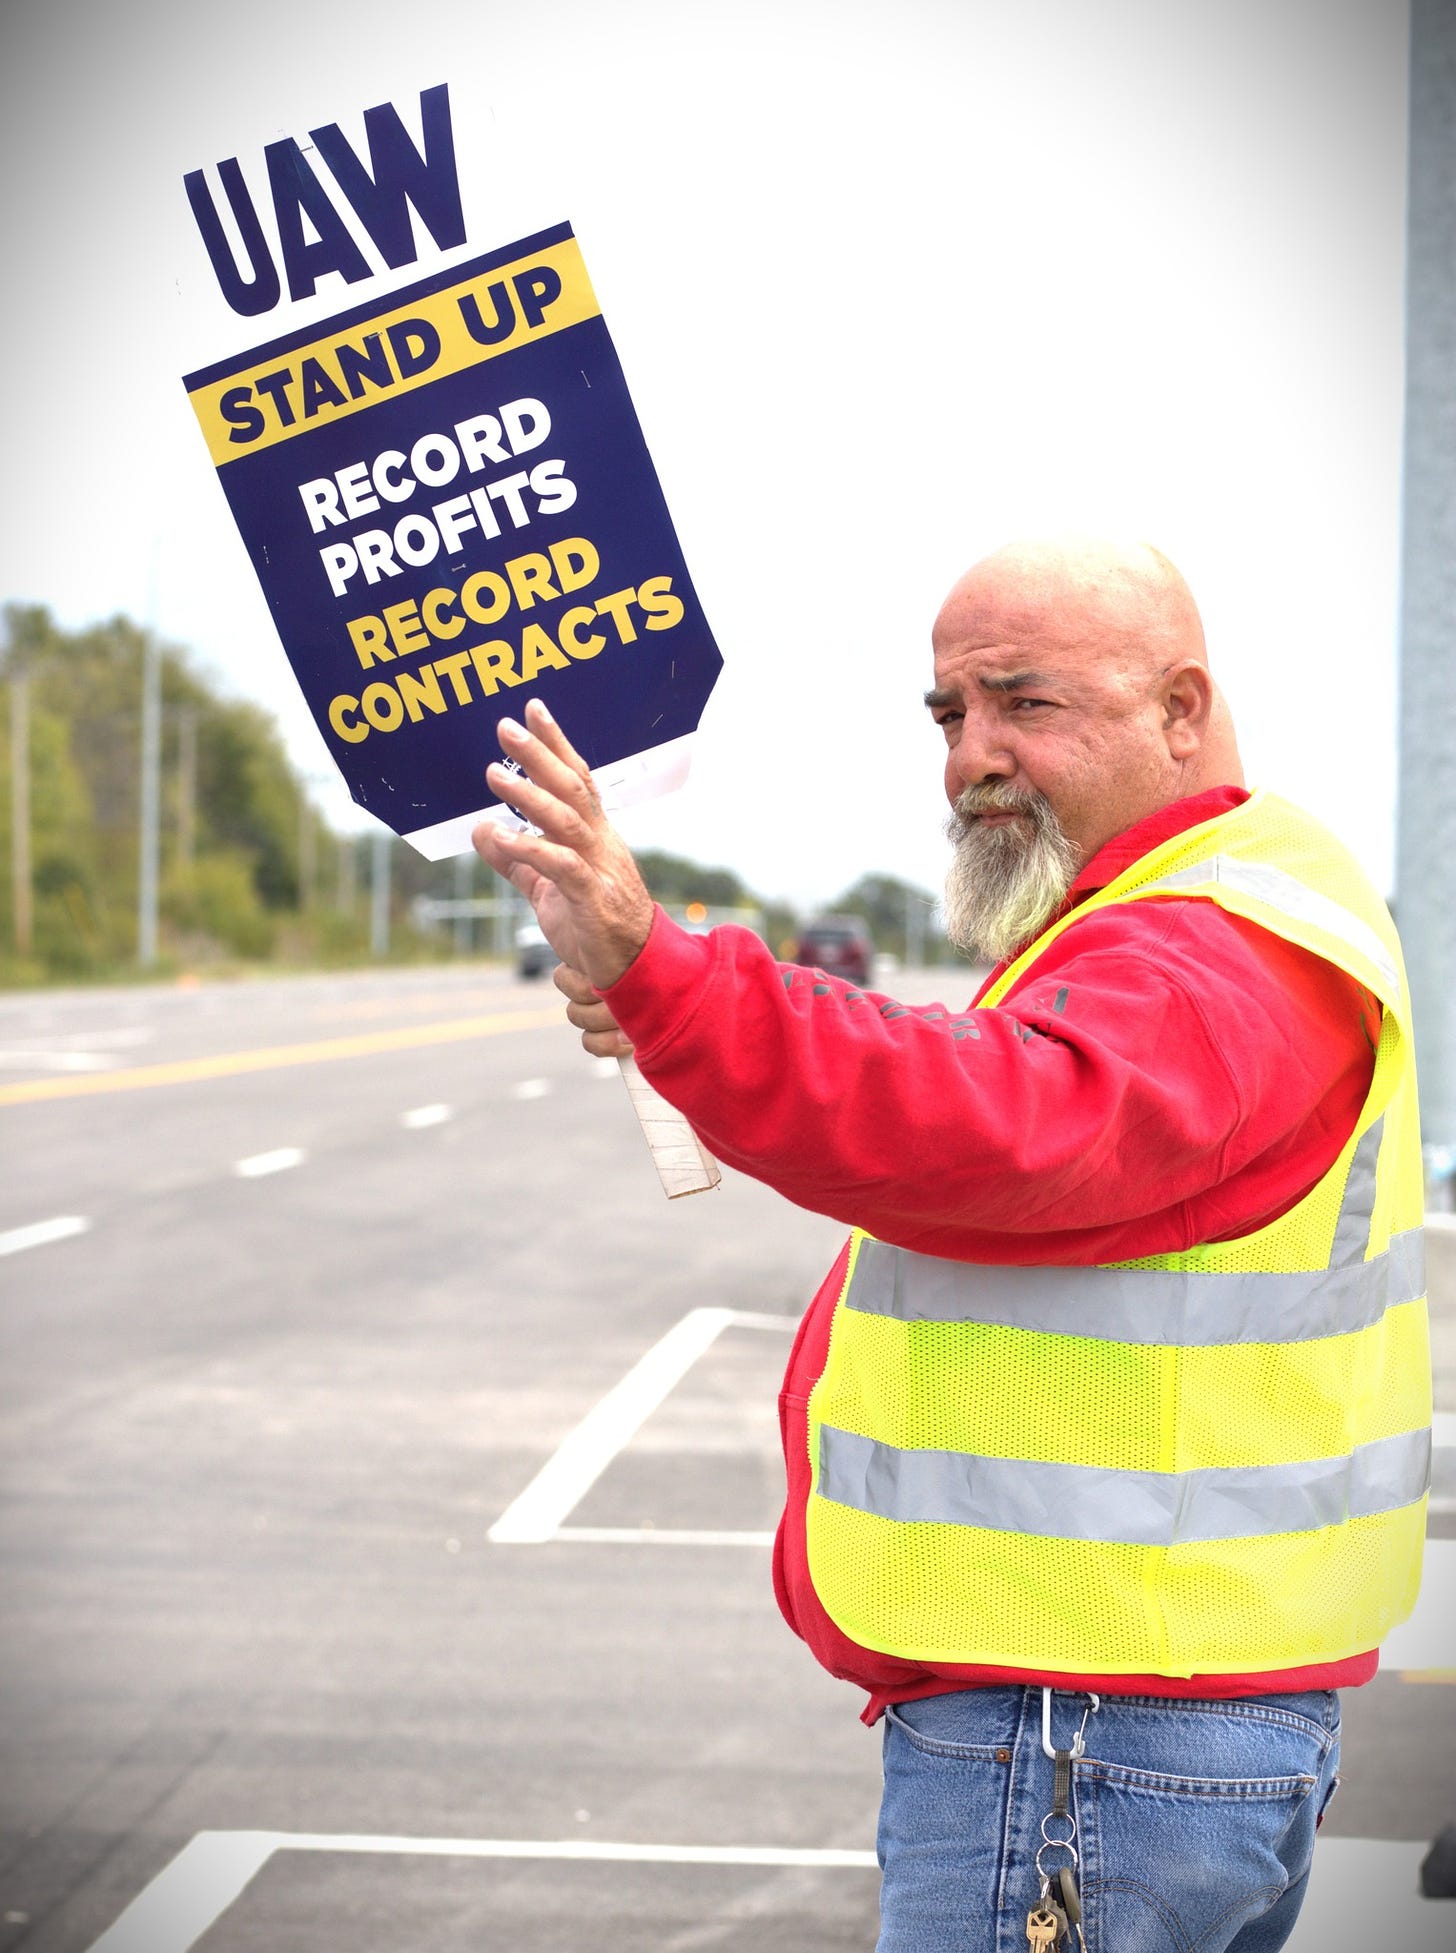 May be an image of 1 person, road and text that says 'STAND UAW UP RECORD PROFITS CONTRACTS RECORD'